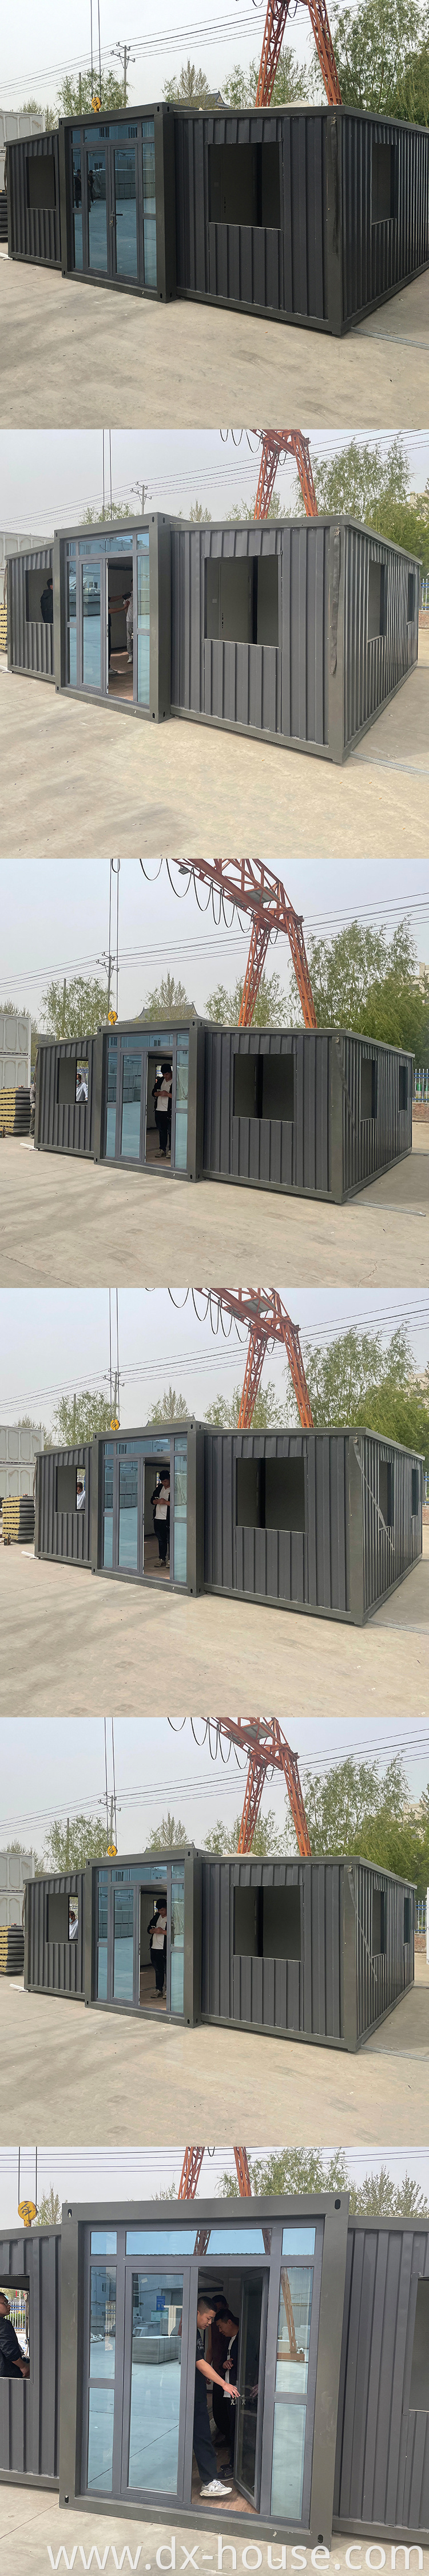 china factory luxury villa prefabricated modern extendable shipping container house prefab expandable home 3 in 1